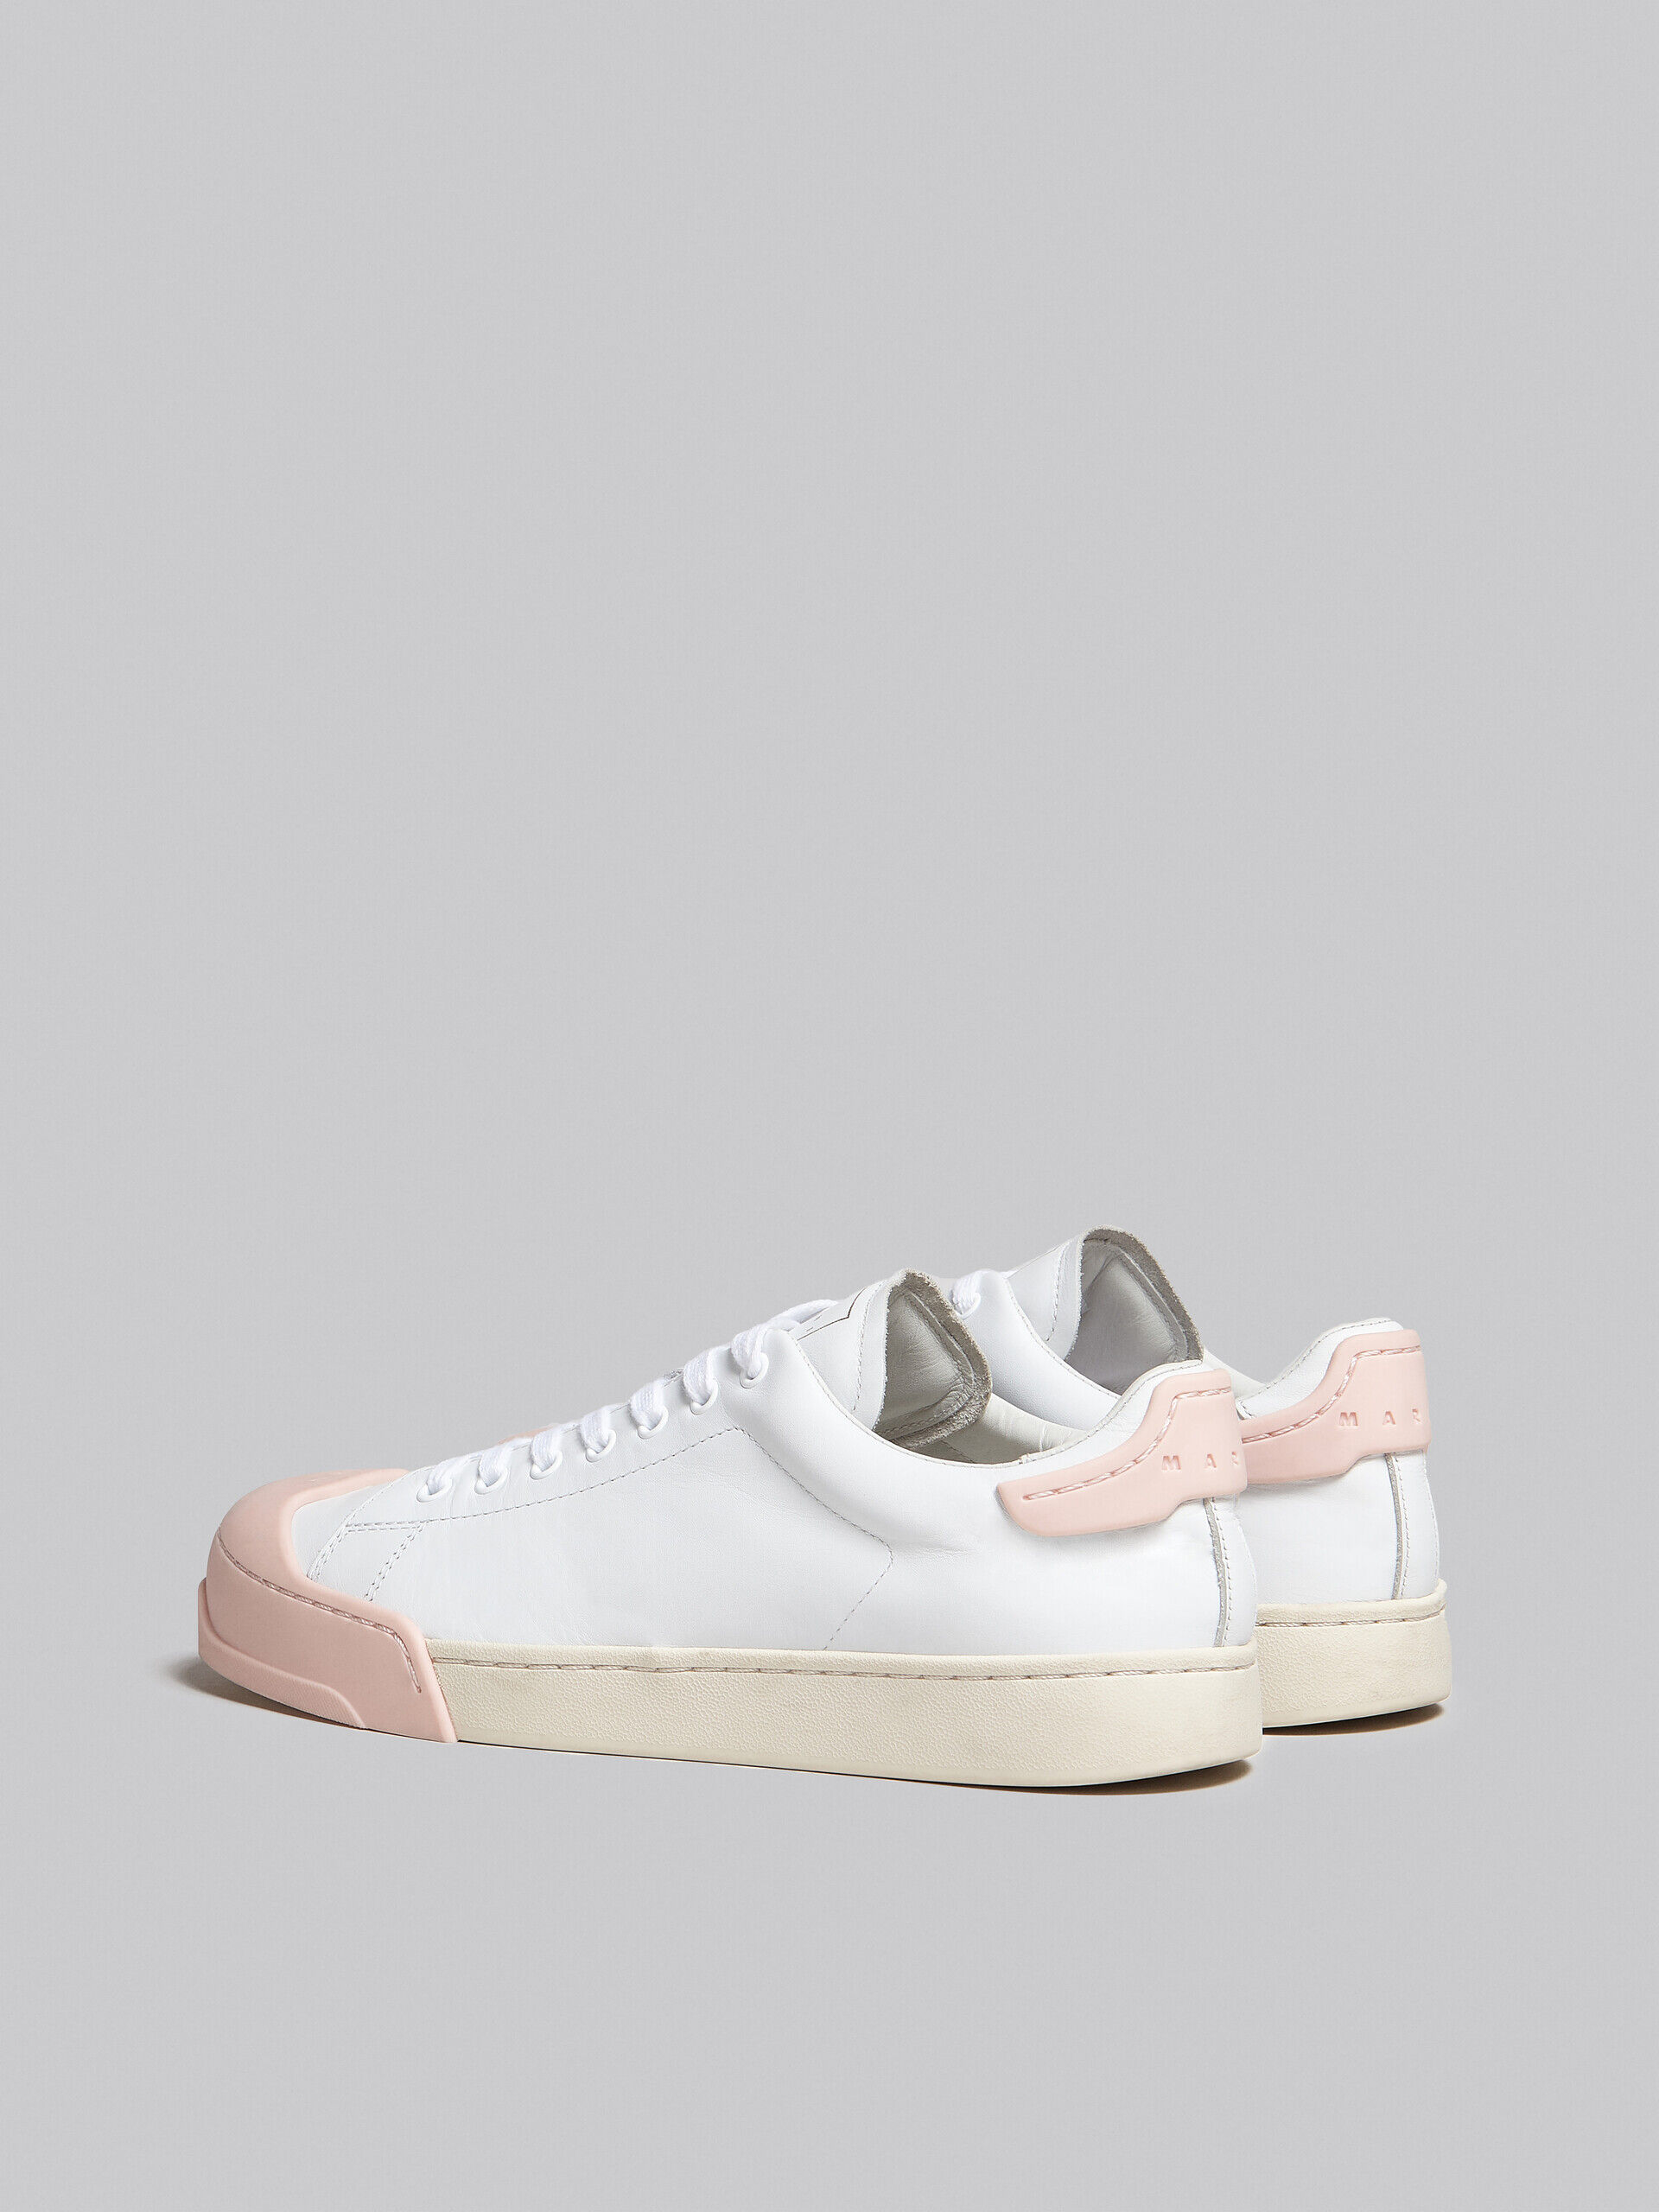 Dada Bumper sneaker in white and pink leather | Marni